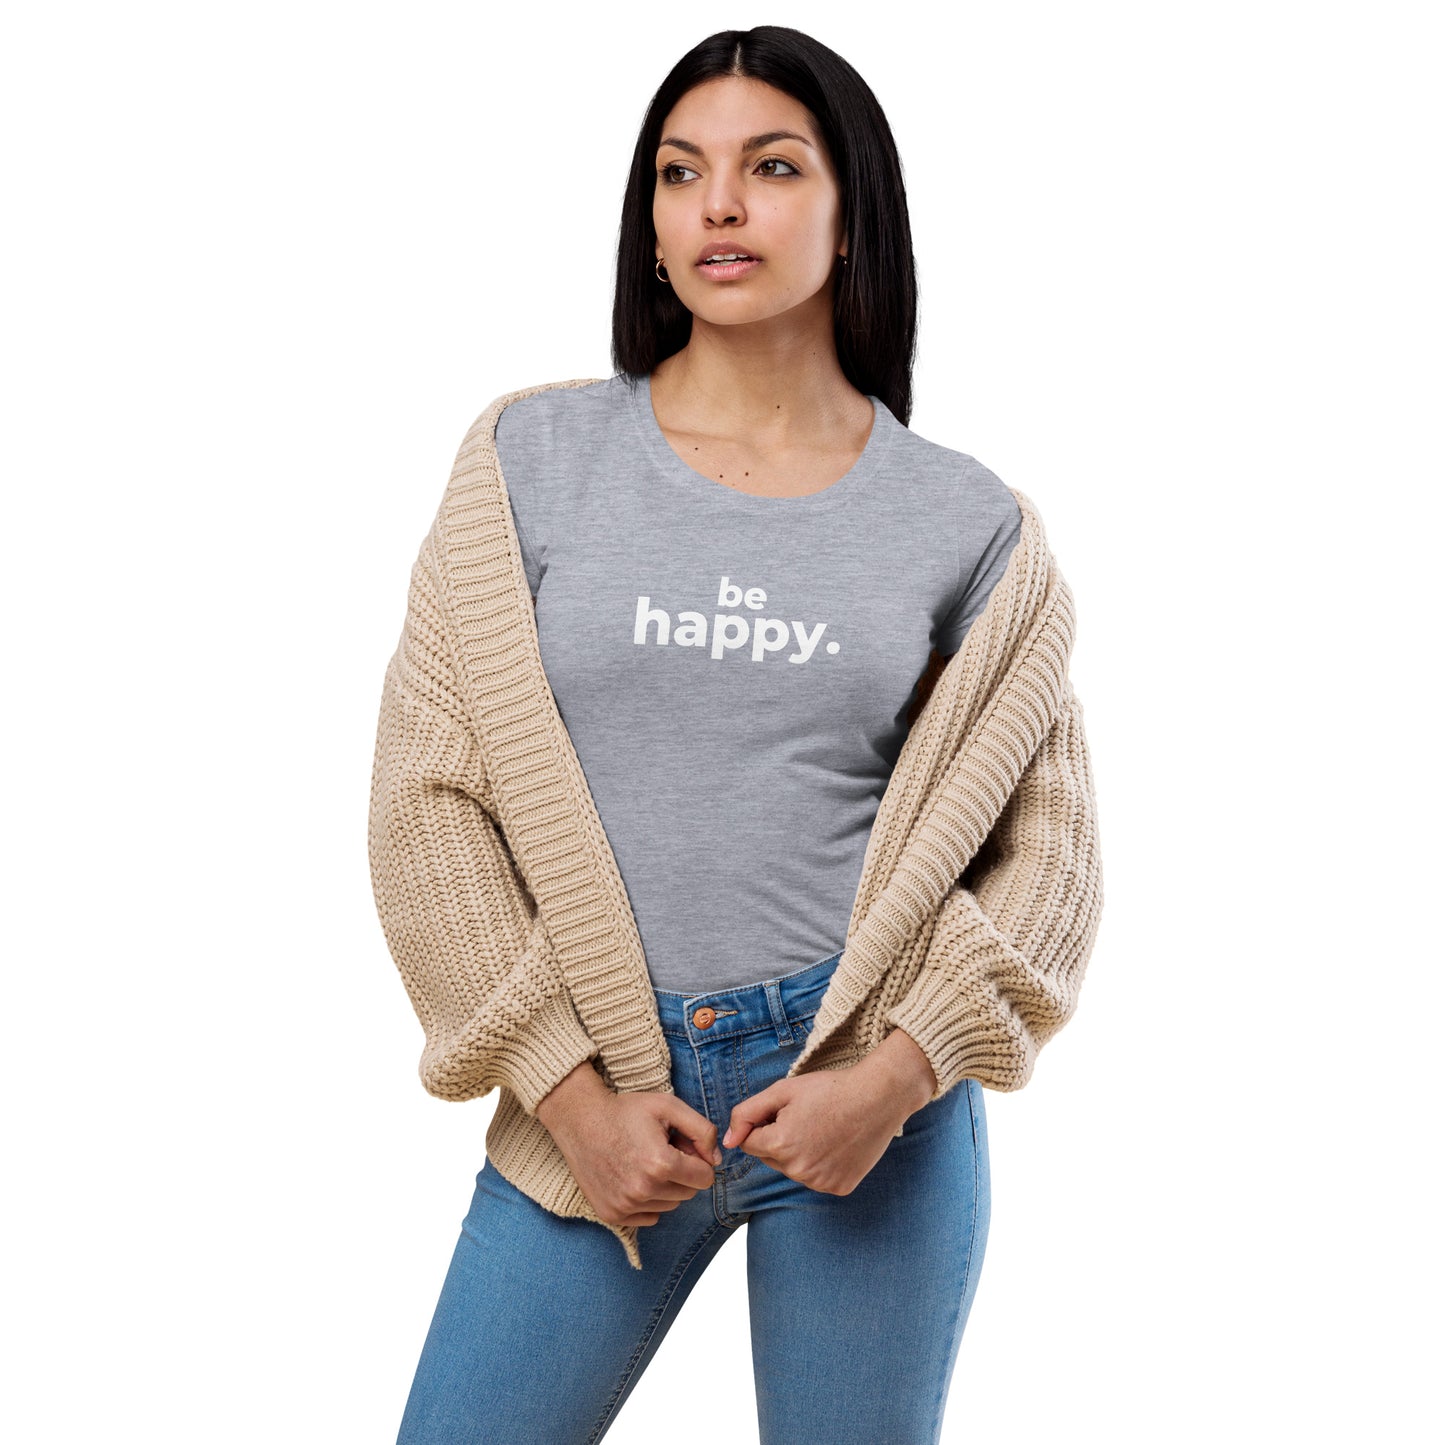 Be Happy - Women’s fitted t-shirt